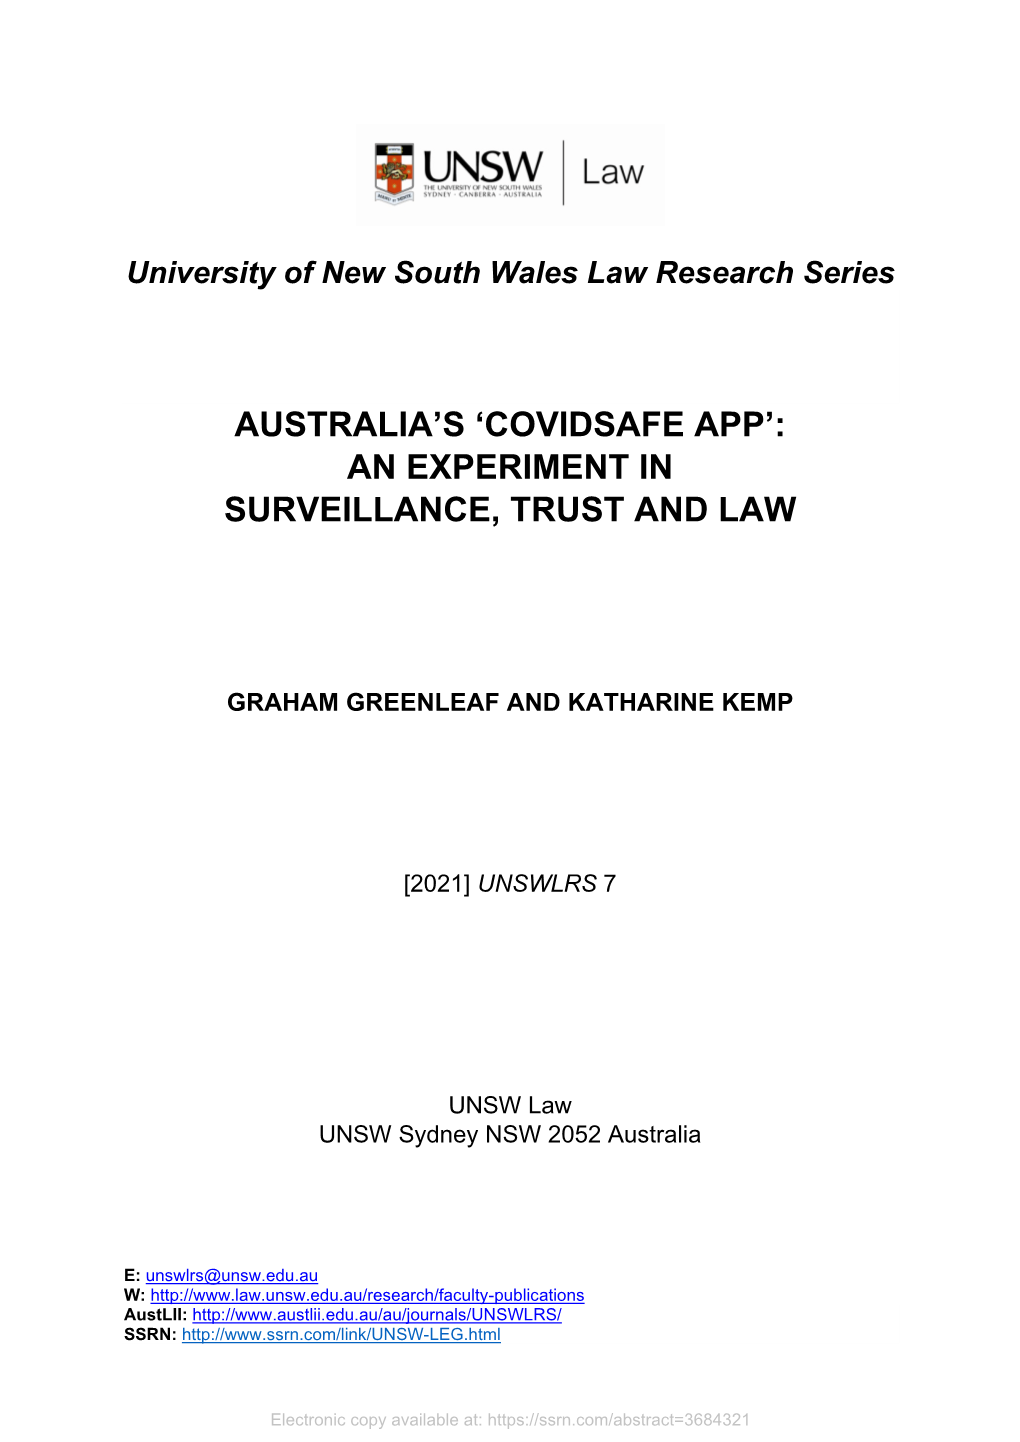 'Covidsafe App': an Experiment in Surveillance, Trust And